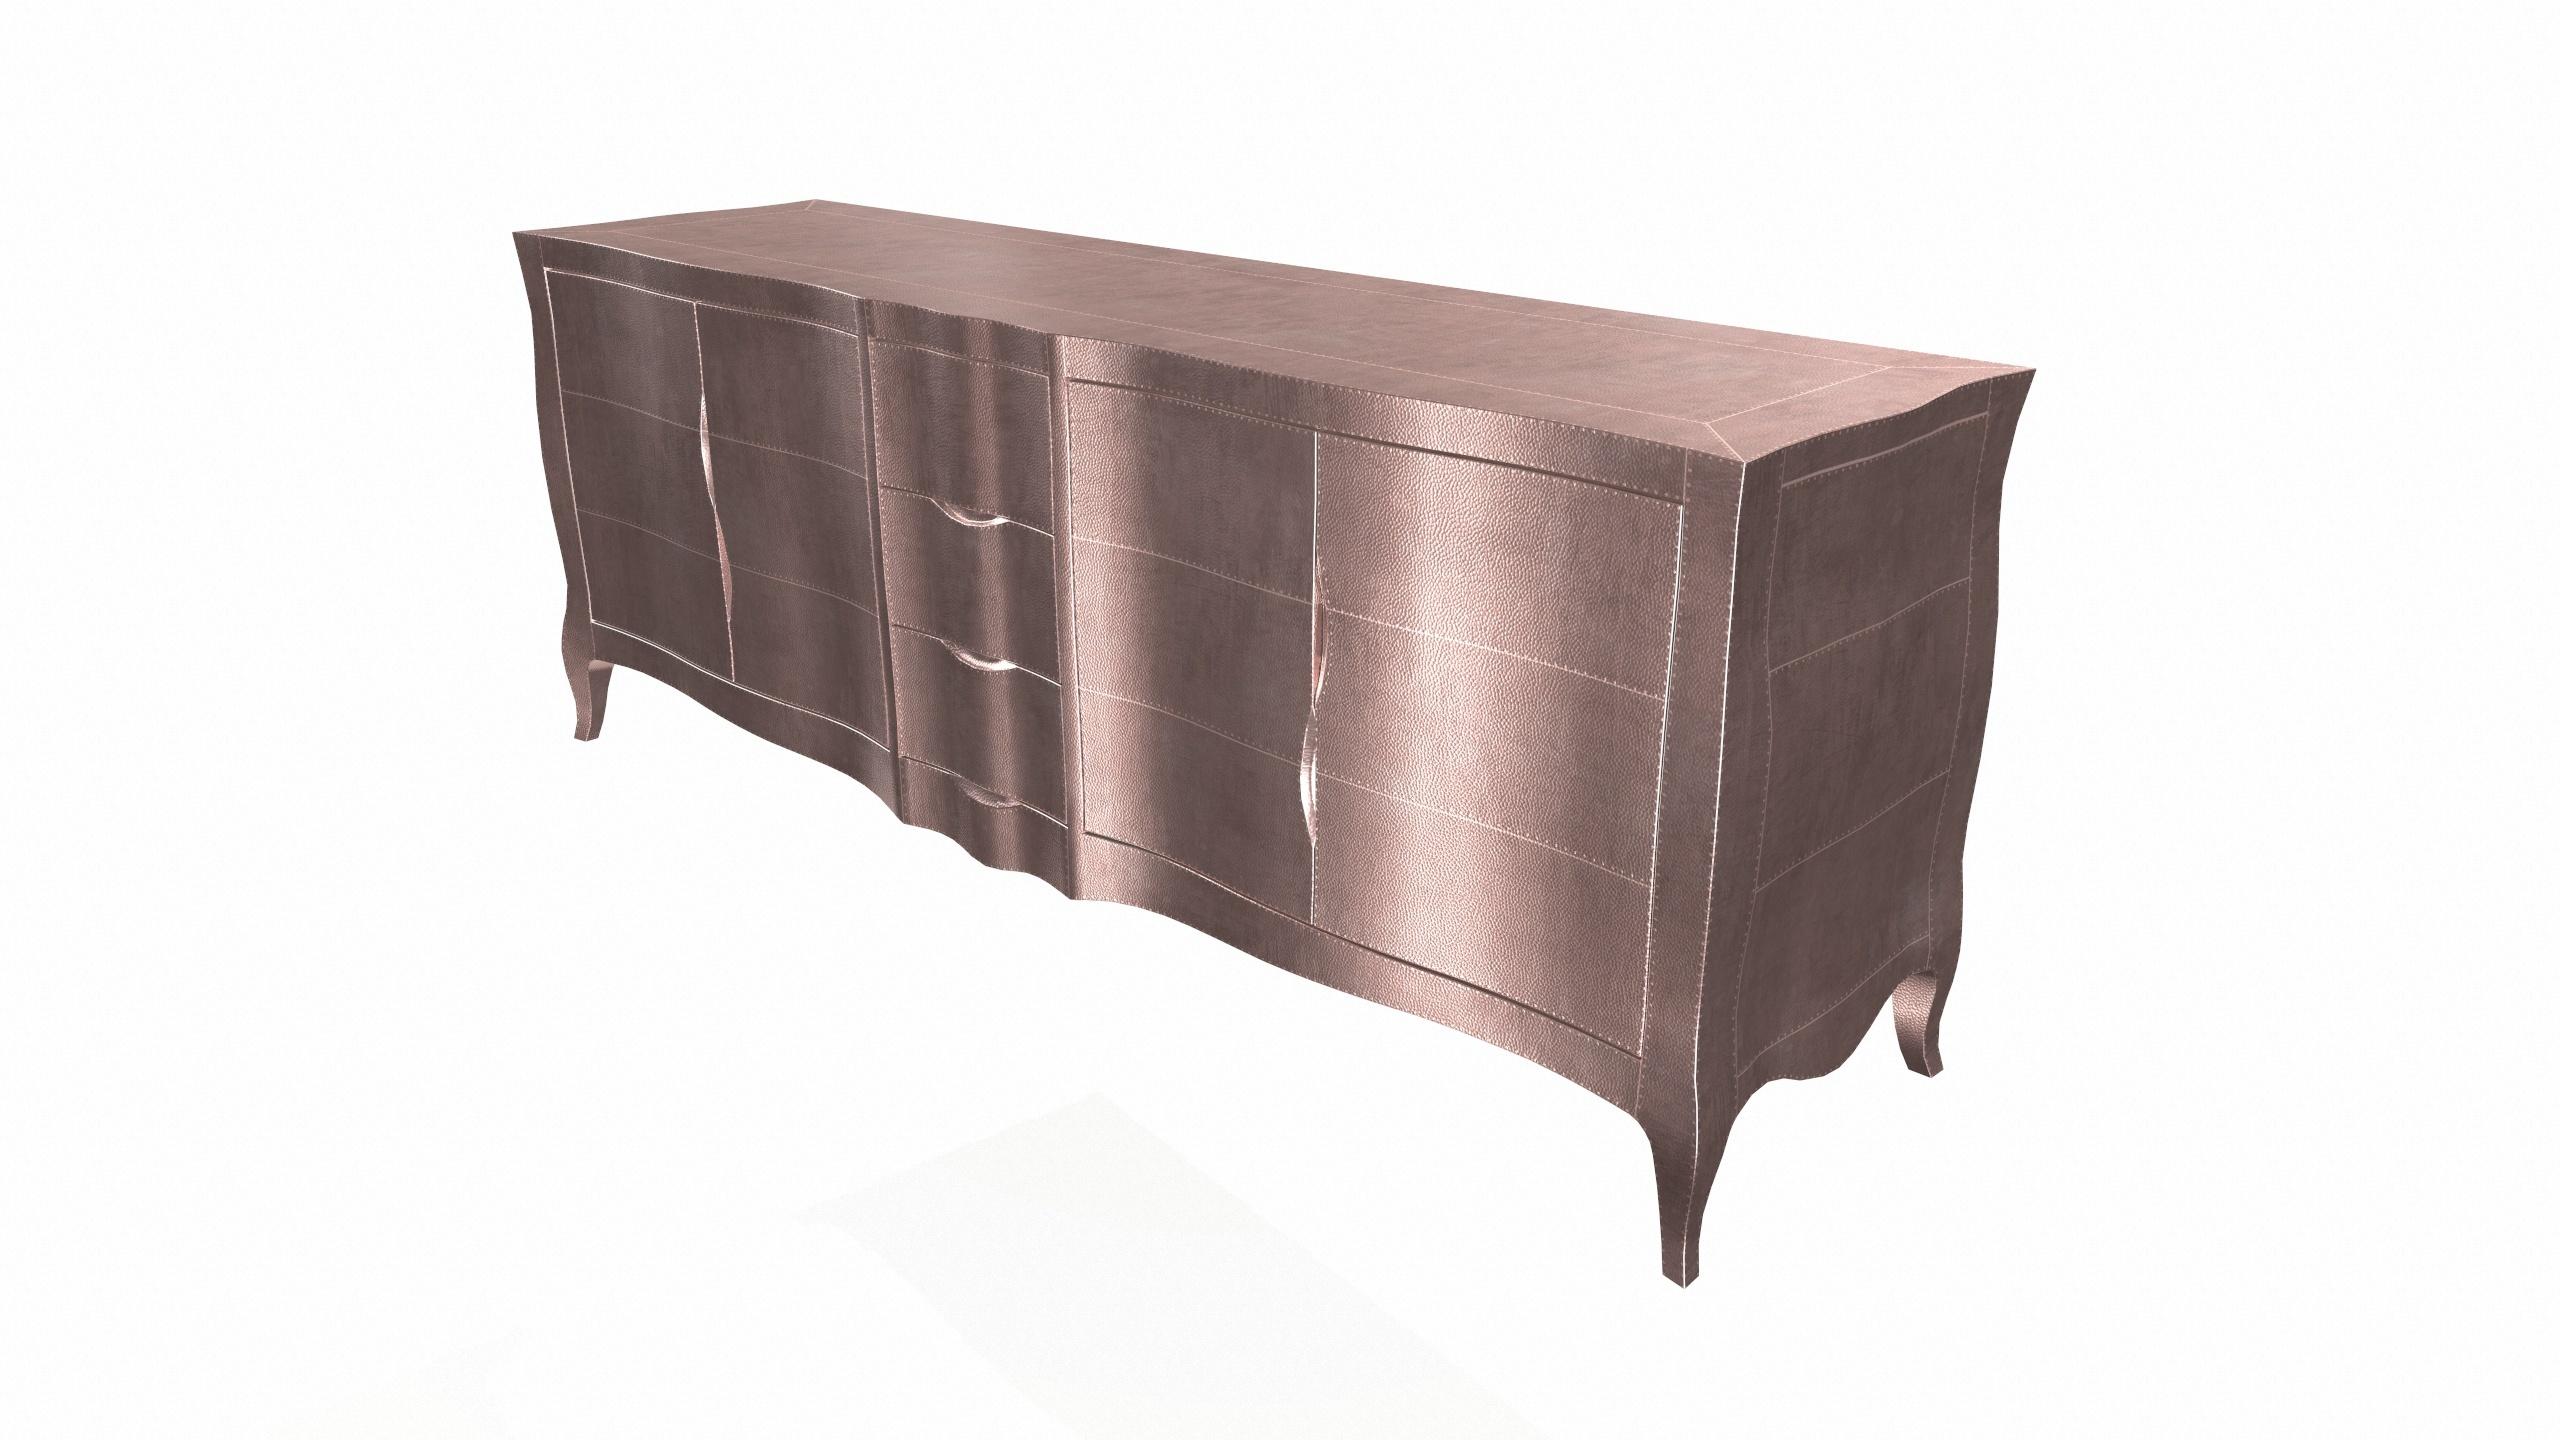 American Louise Credenza Art Deco Cabinets in Mid. Hammered Copper by Paul Mathieu For Sale